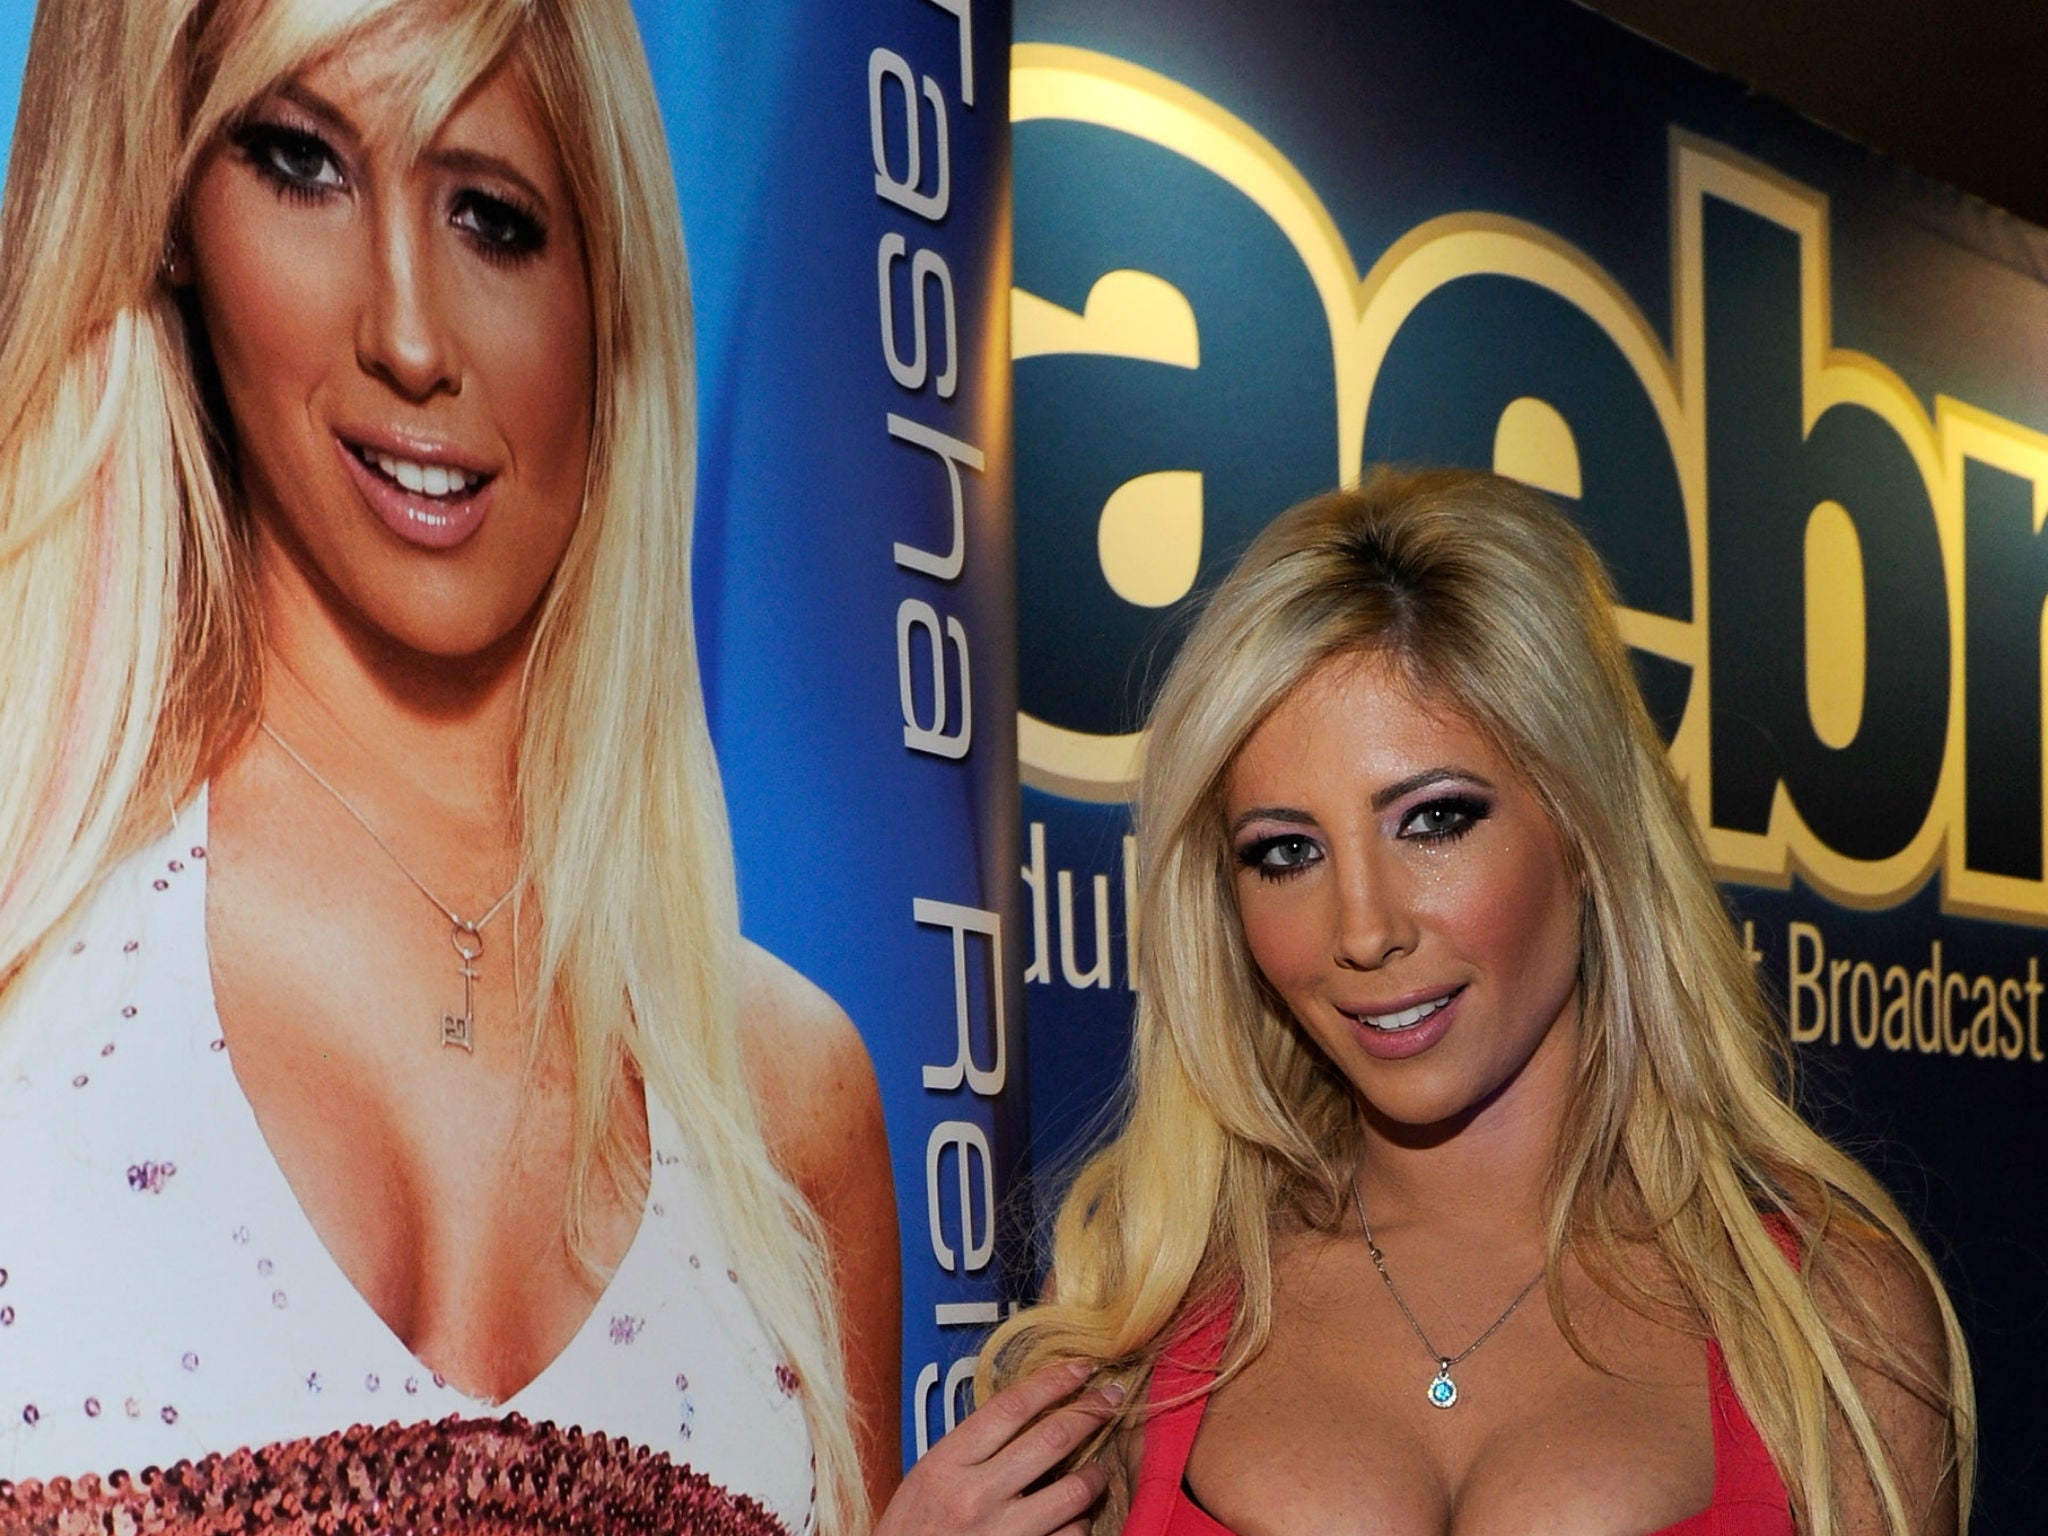 Tasha - Adult actor Tasha Reign claims being forced to wear condoms 'opens up the  gateway to mandate my body' | The Independent | The Independent